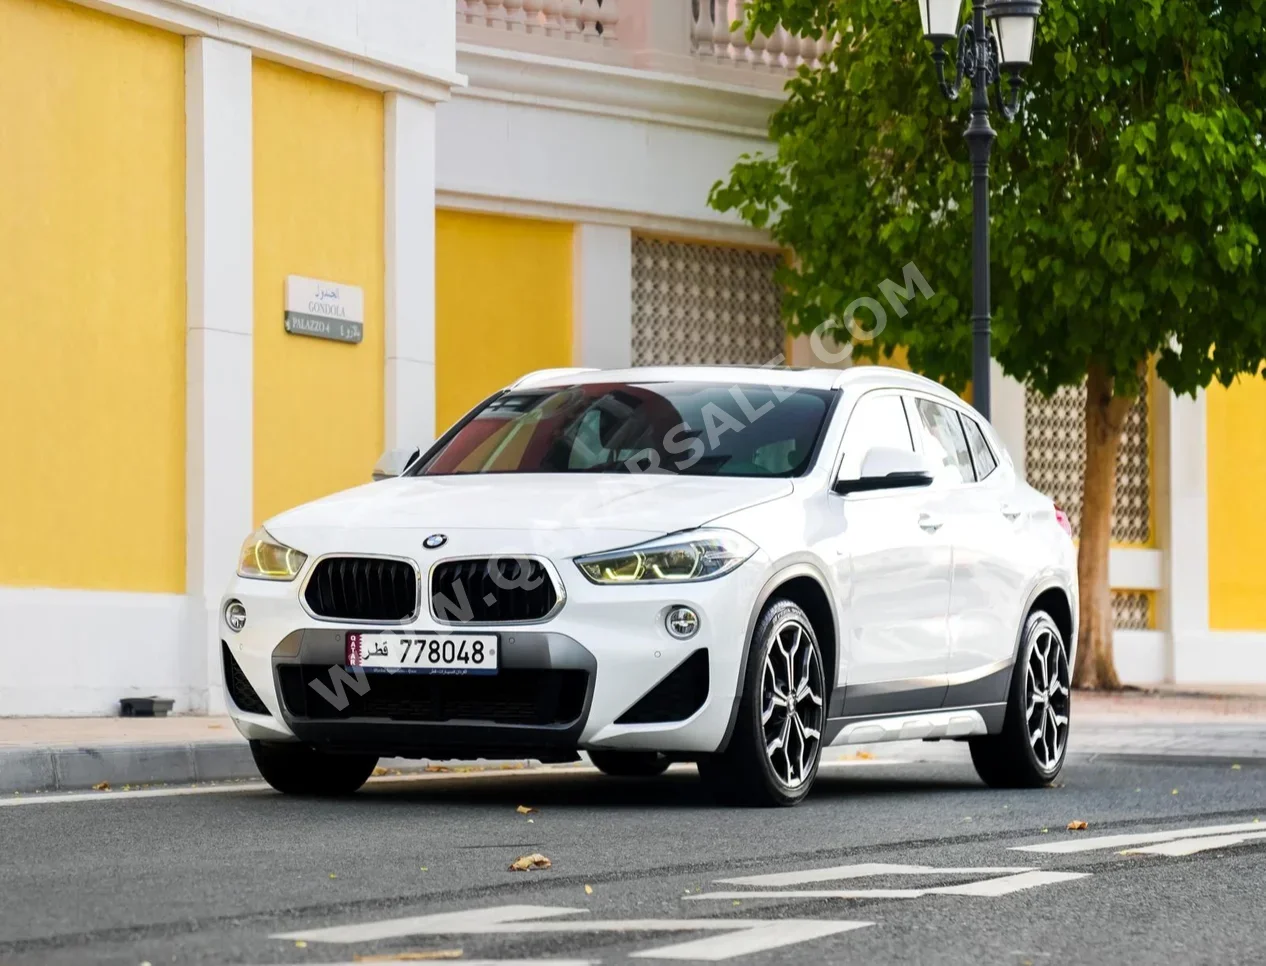 BMW  X-Series  X2  2019  Automatic  80,000 Km  4 Cylinder  Front Wheel Drive (FWD)  SUV  White